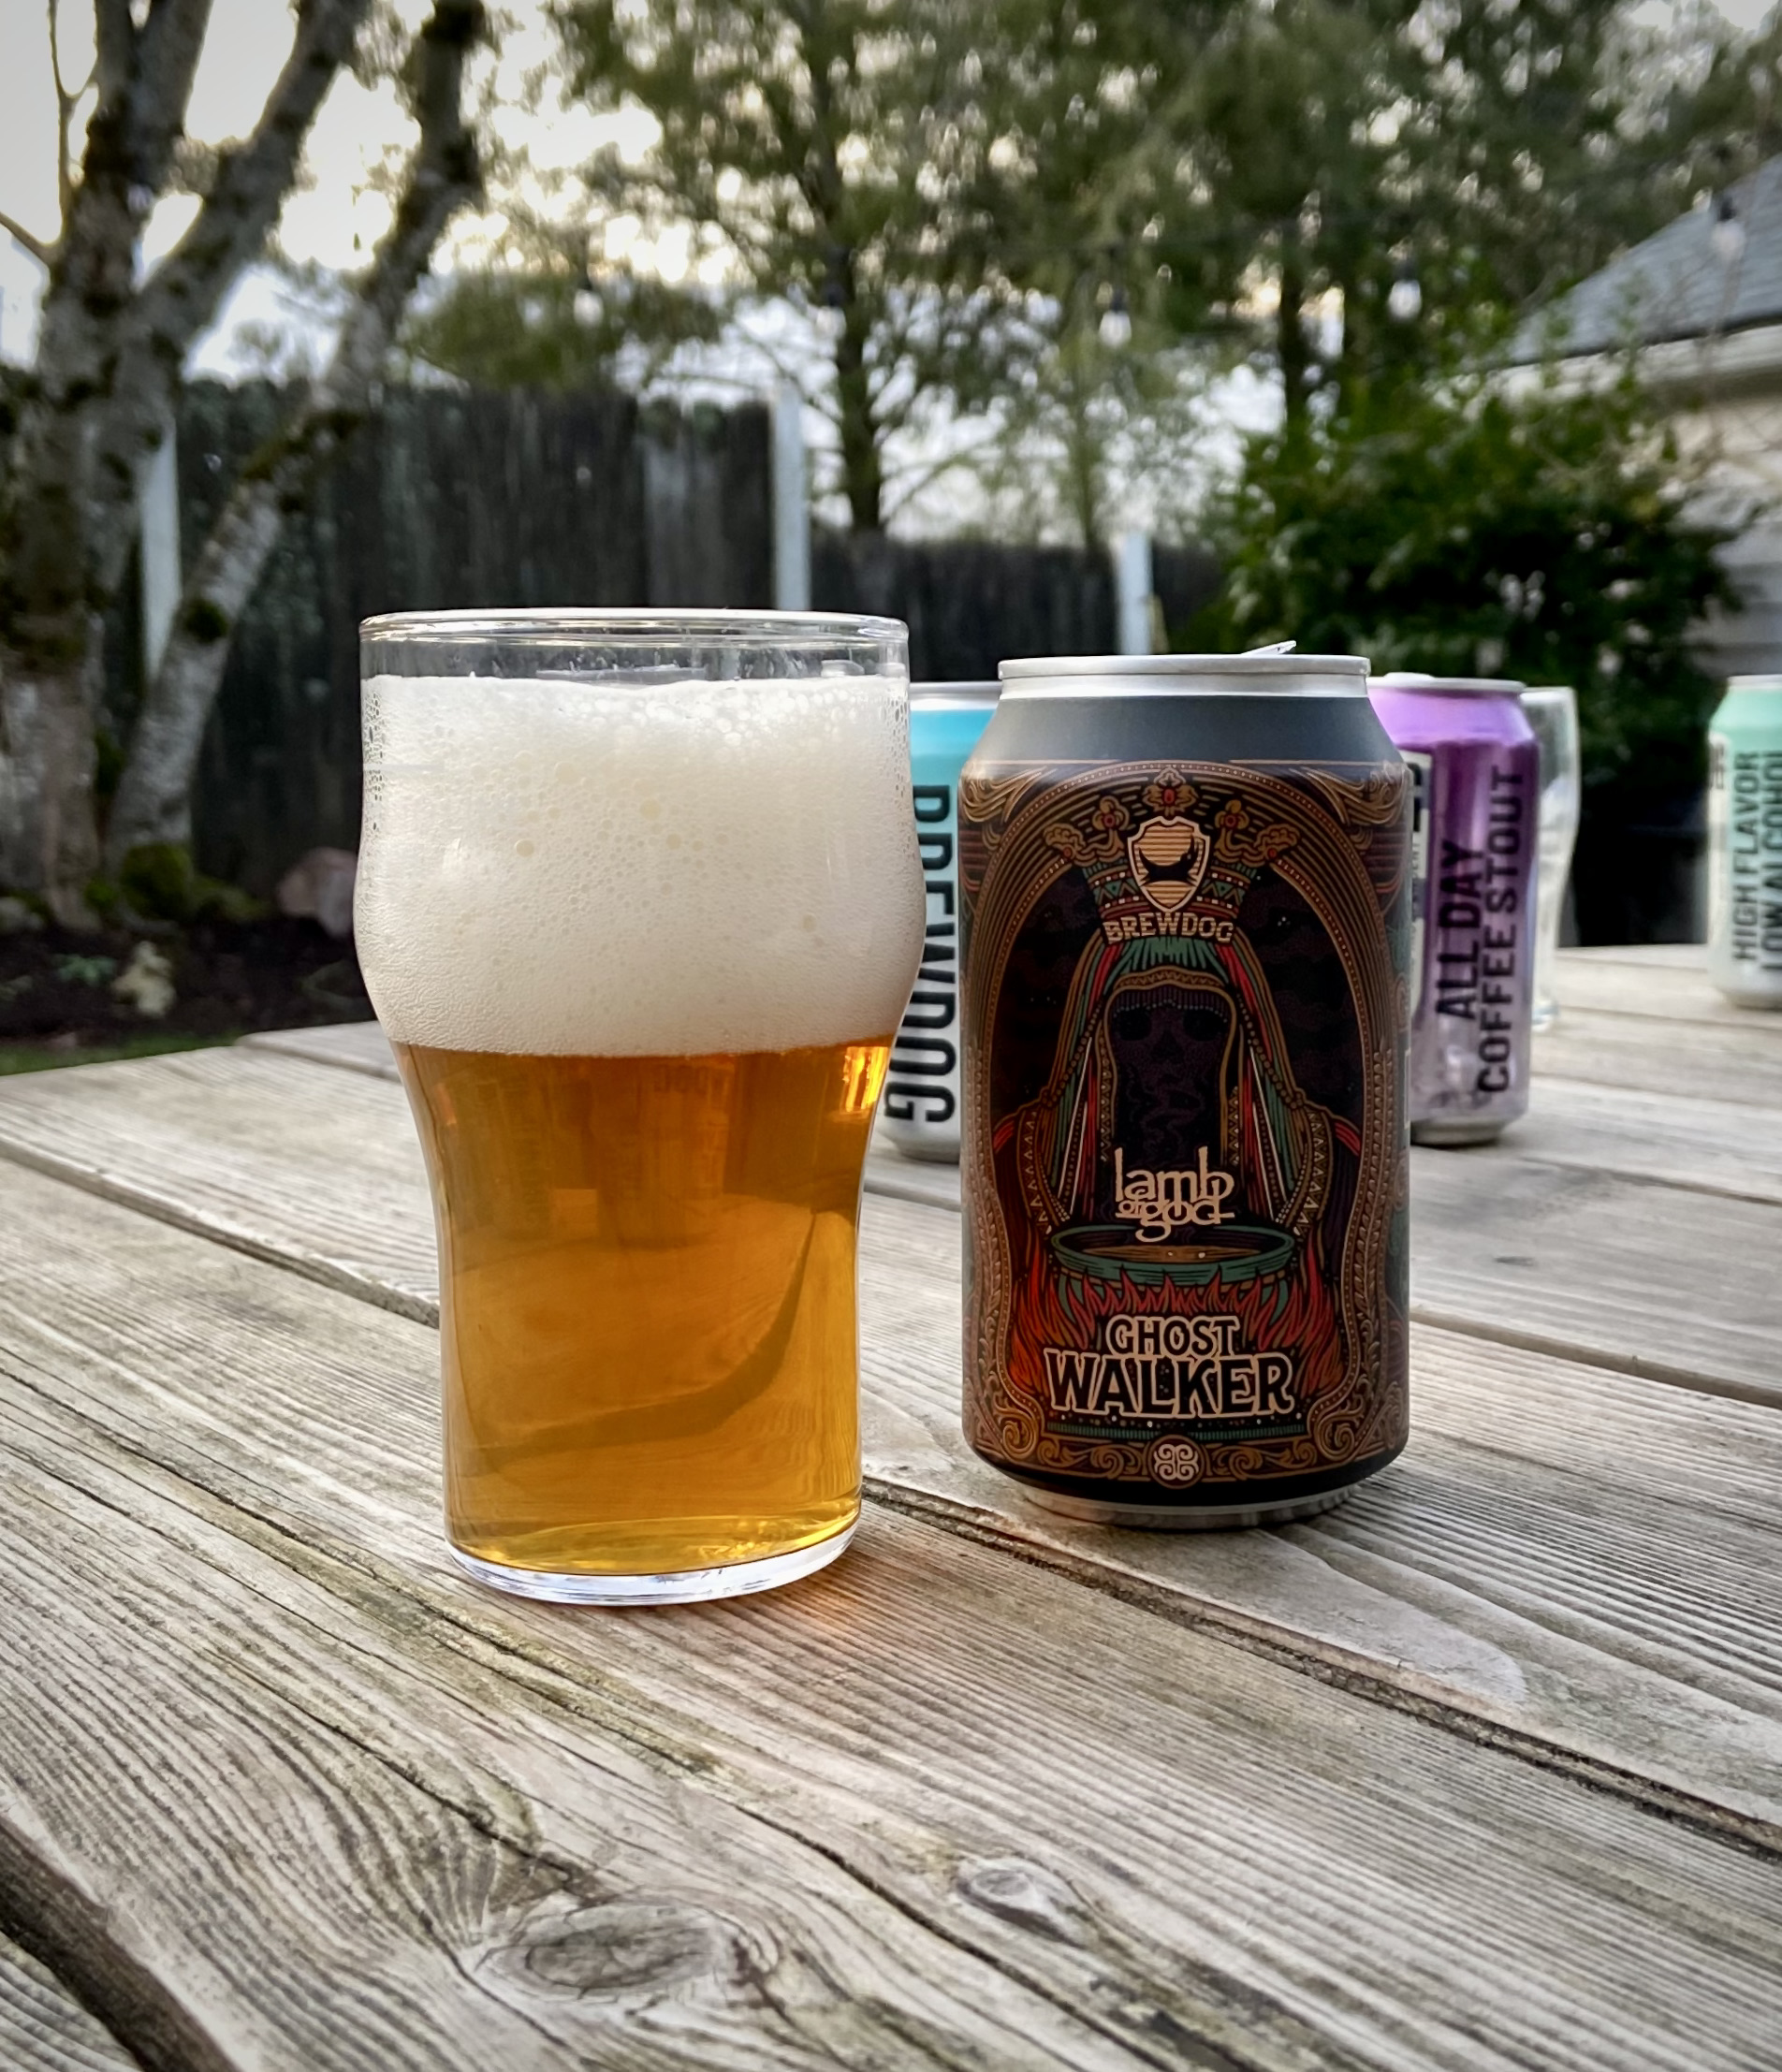 BrewDog collaborates with the band Lamb of God on Ghost Walker, a non-alcoholic beer.